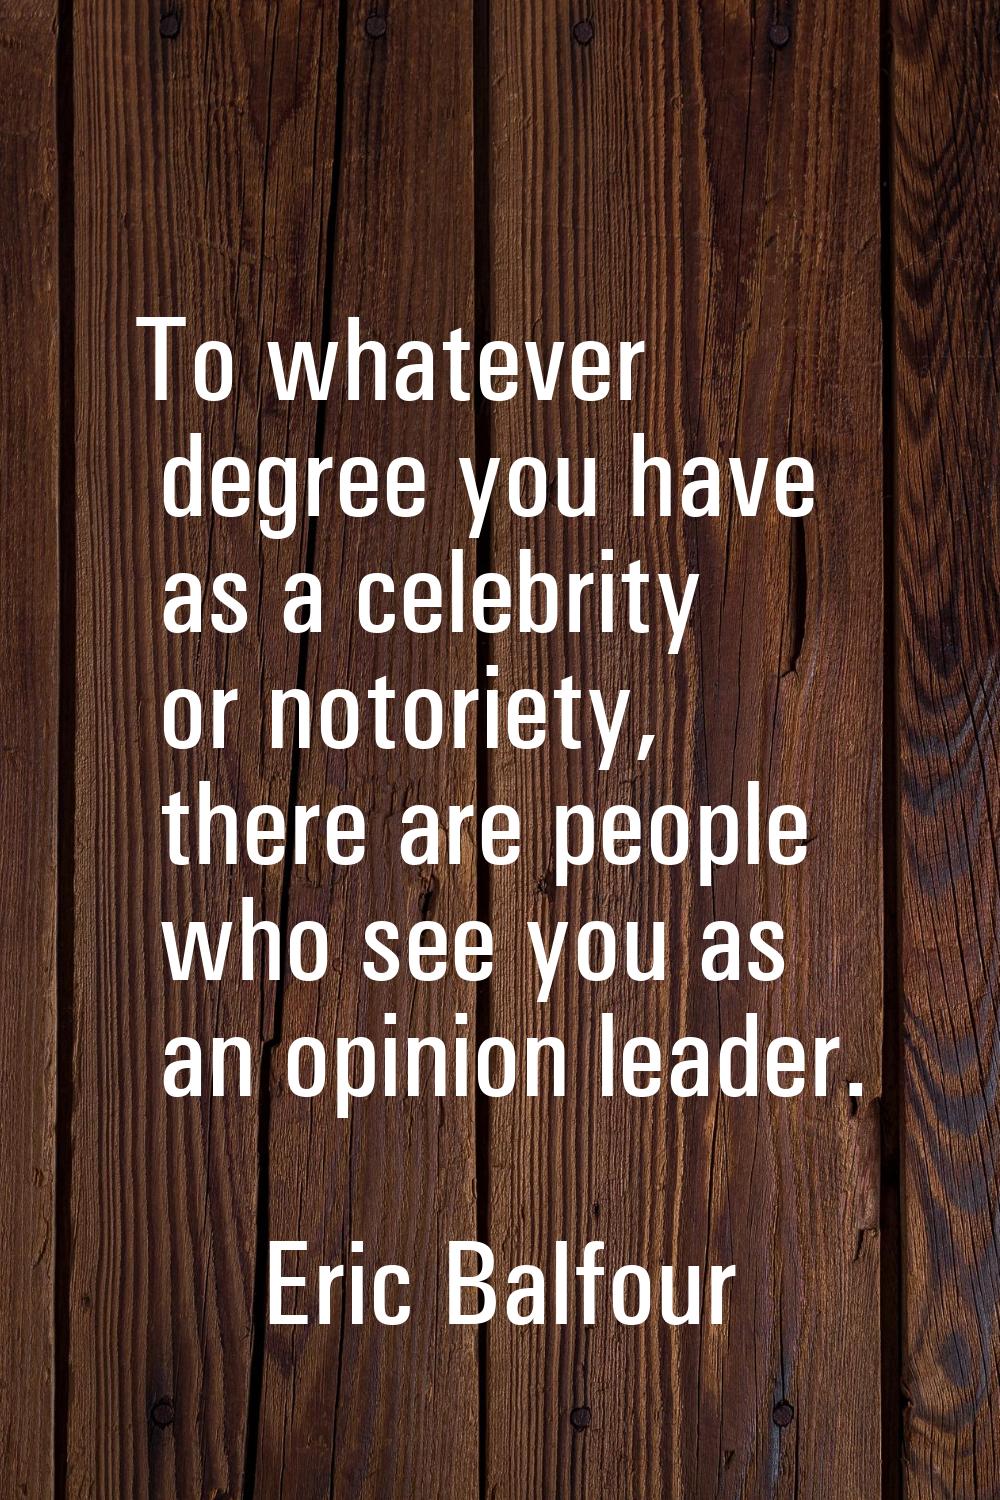 To whatever degree you have as a celebrity or notoriety, there are people who see you as an opinion